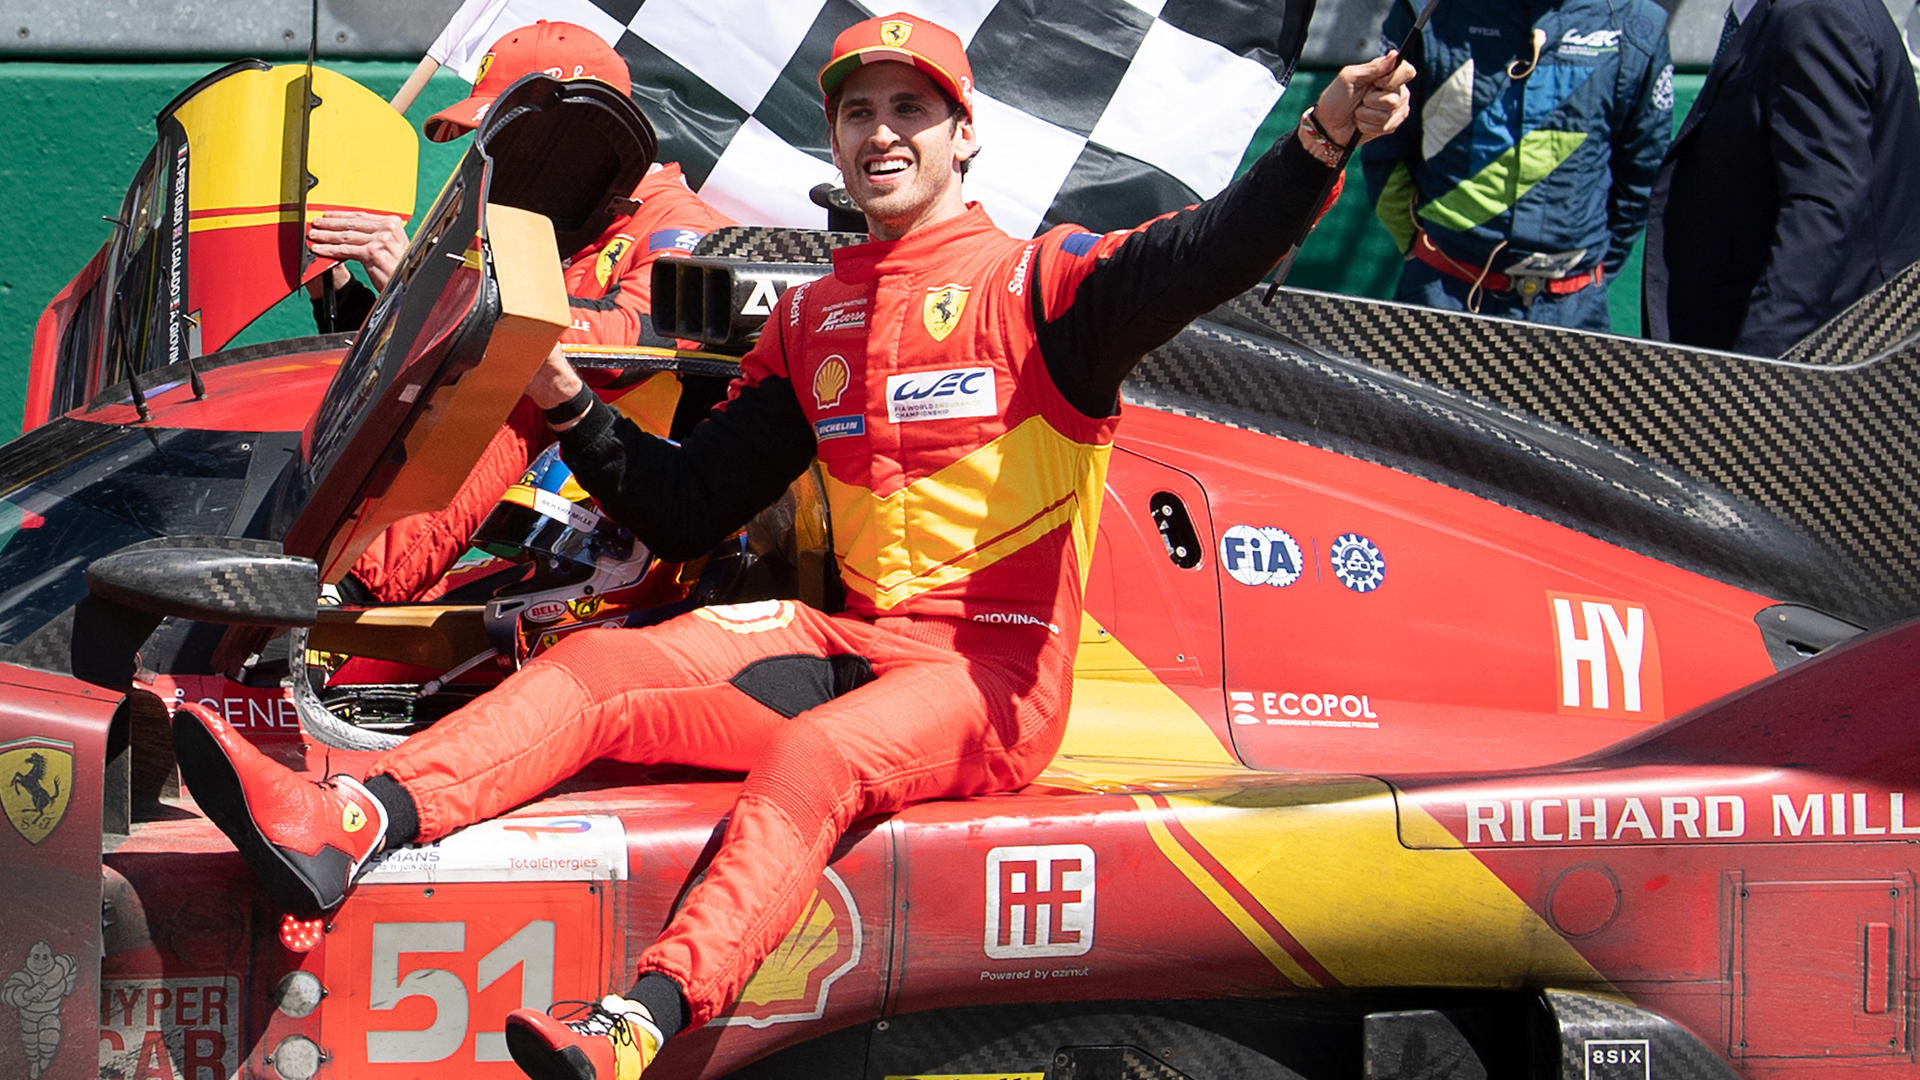 We should be very proud' – Ex-F1 driver Giovinazzi hails 'fantastic' effort  as Ferrari make winning return to 24 Hours of Le Mans top class | Formula 1®